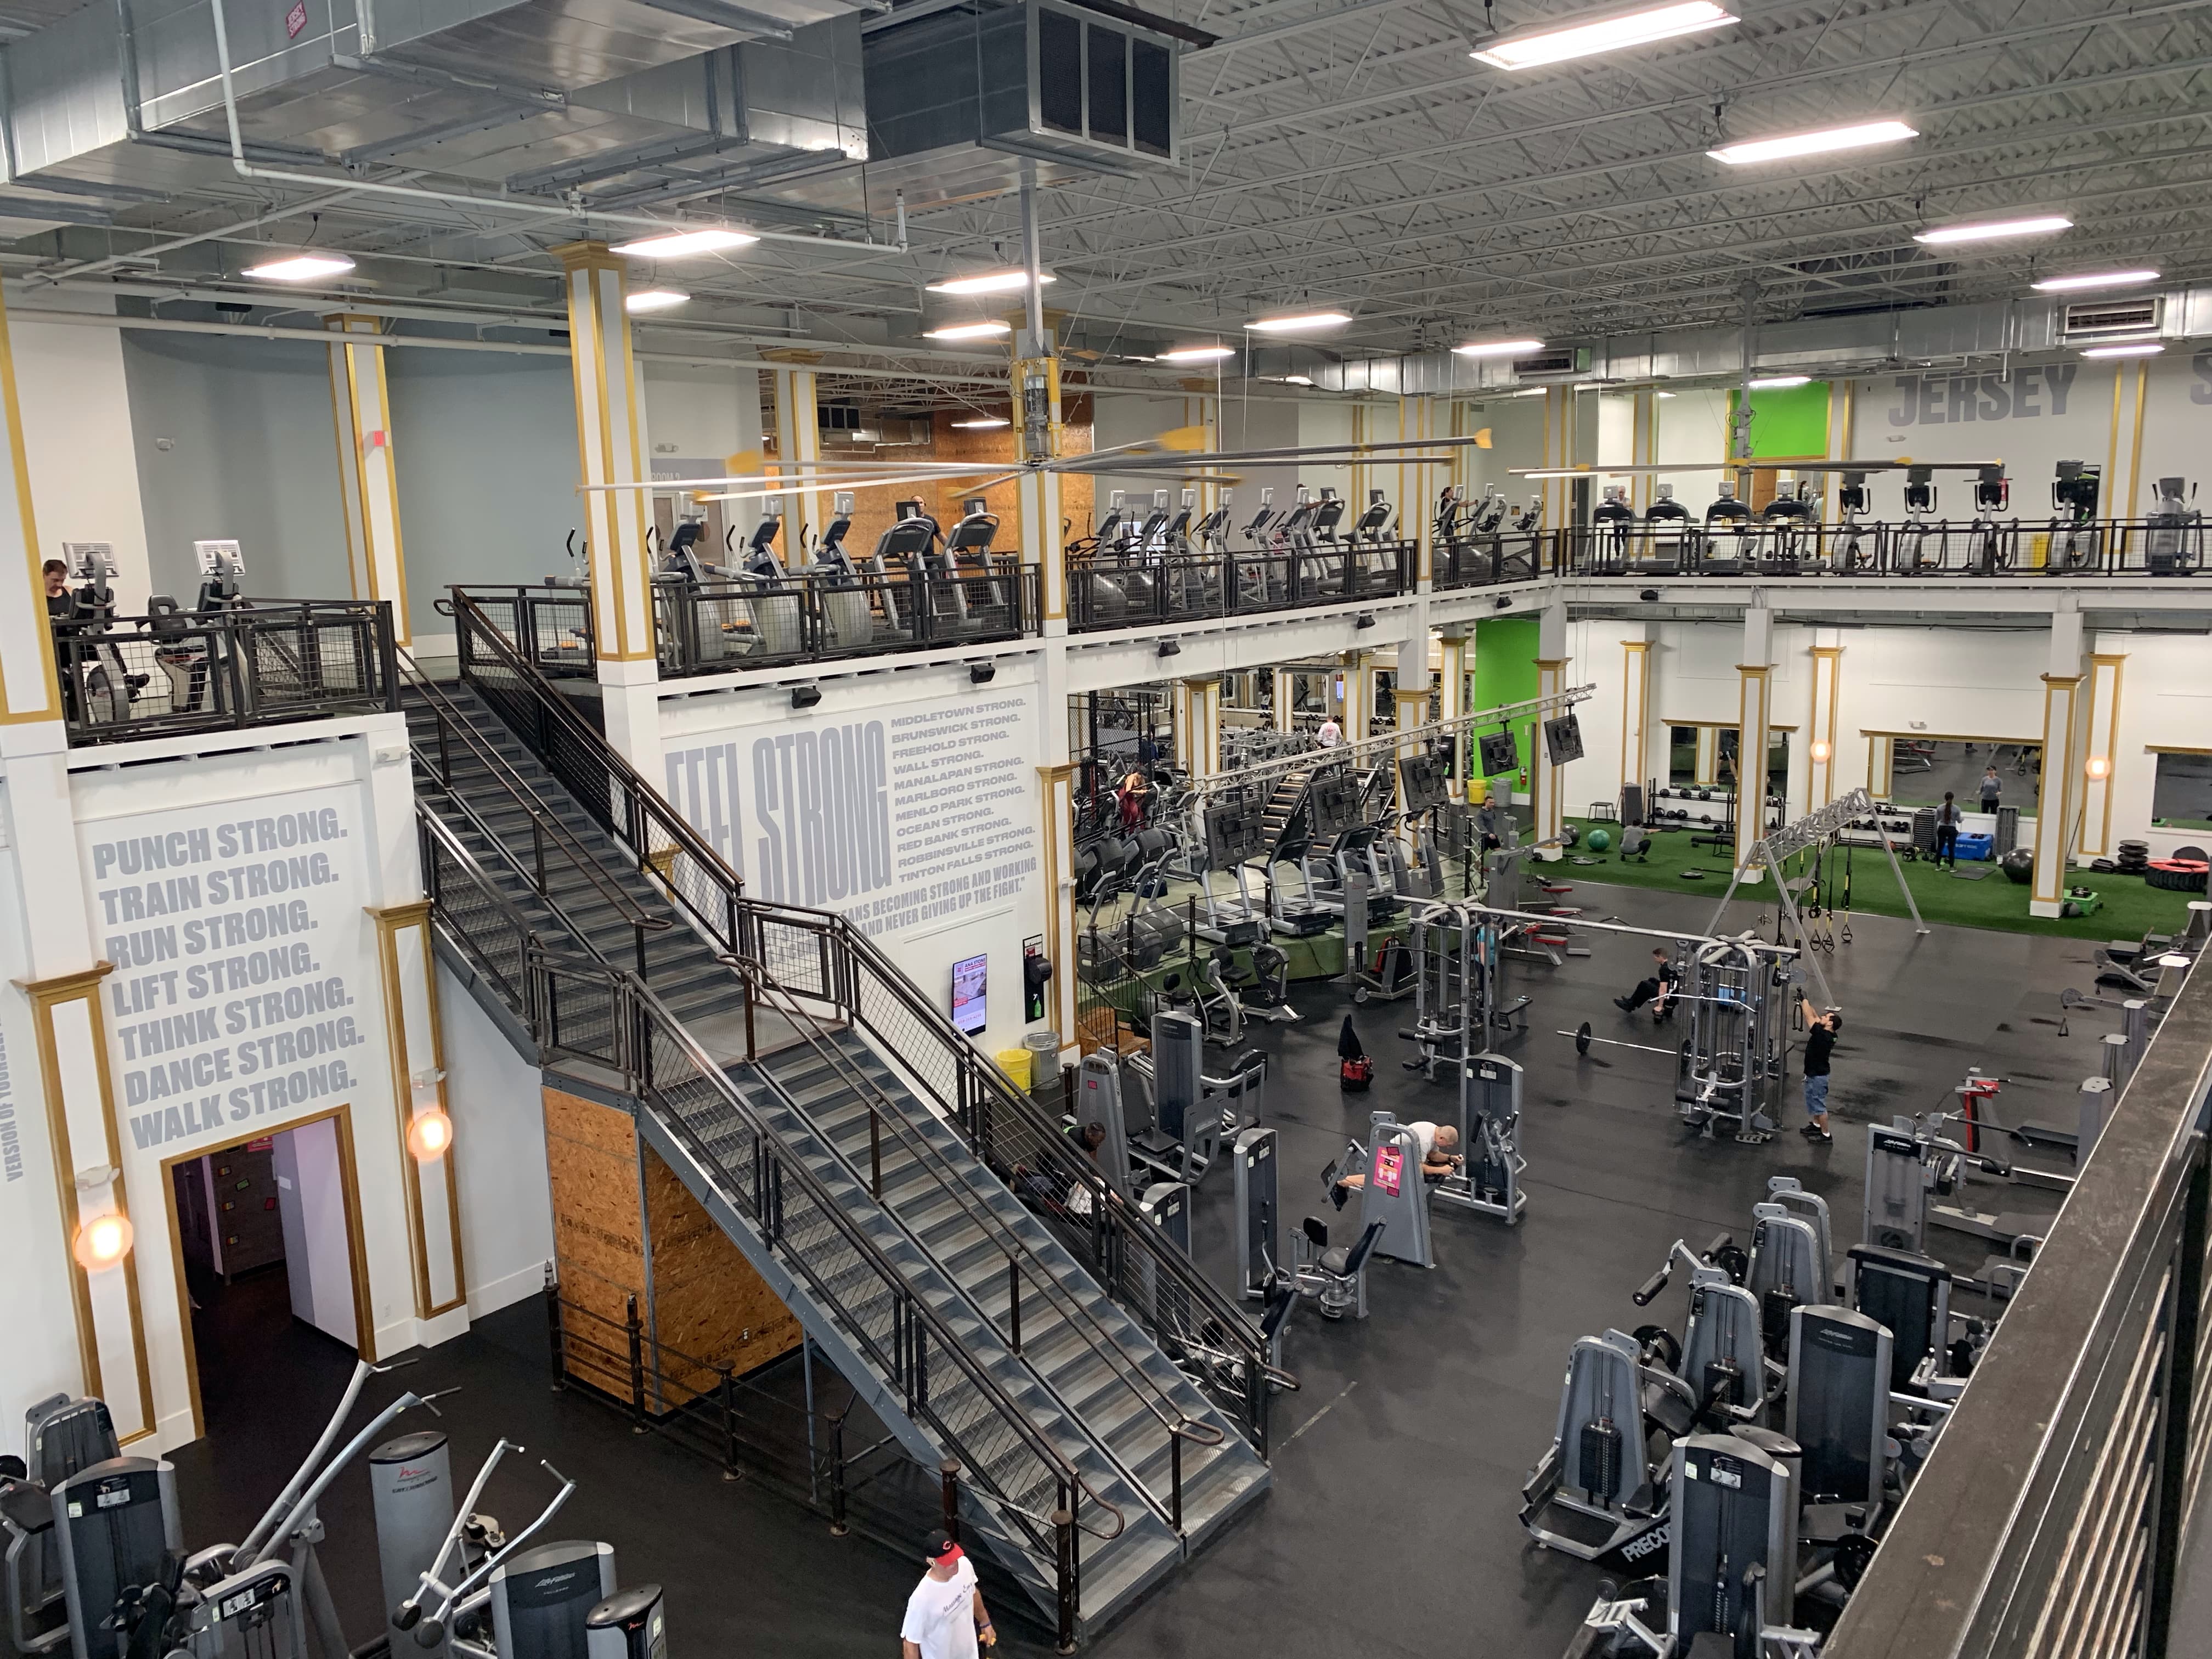 jersey strong gym prices